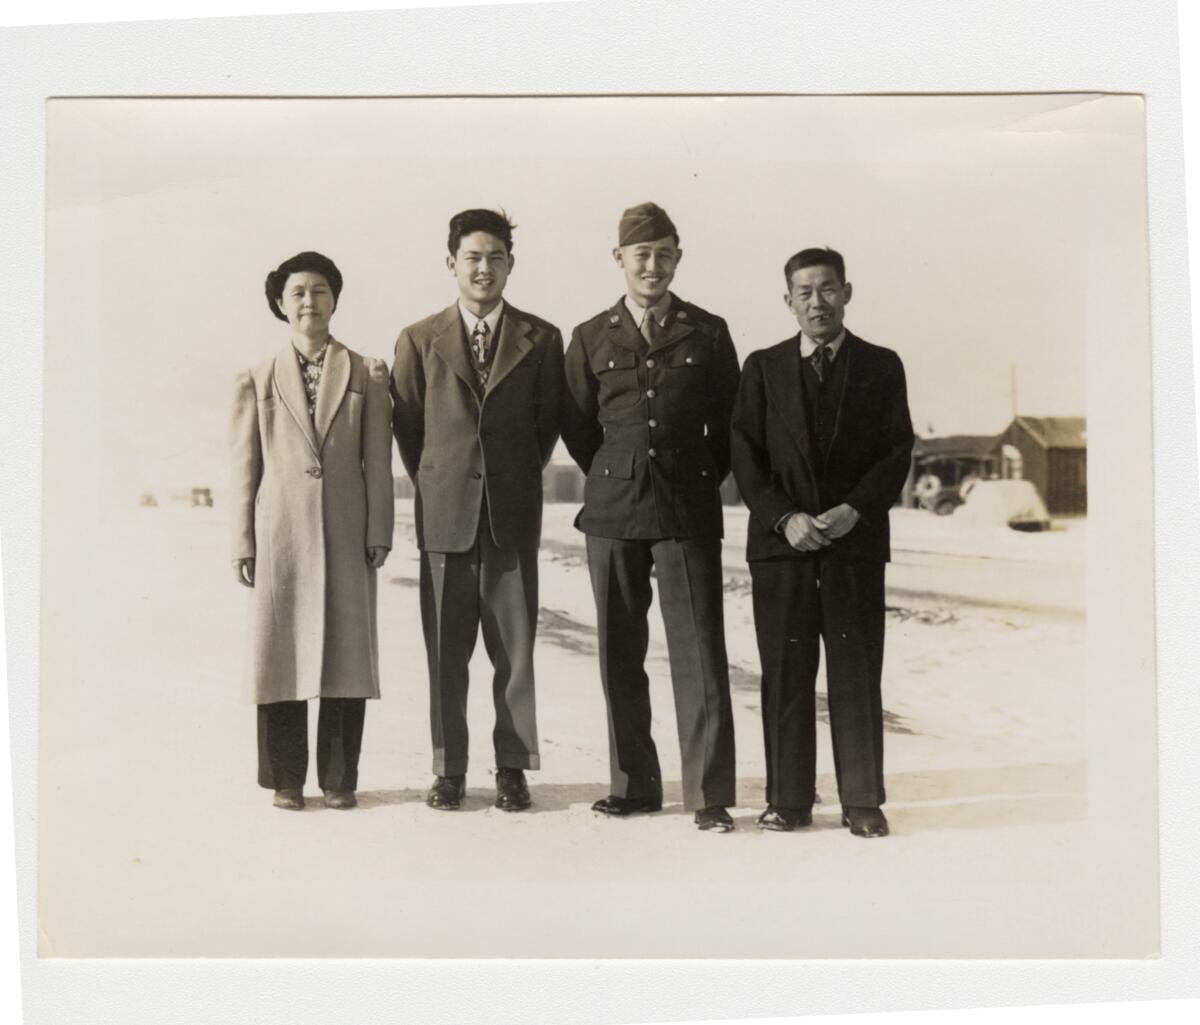 A 1940s photo shows a uniformed Japanese American soldier posed with his mother, father and brother.